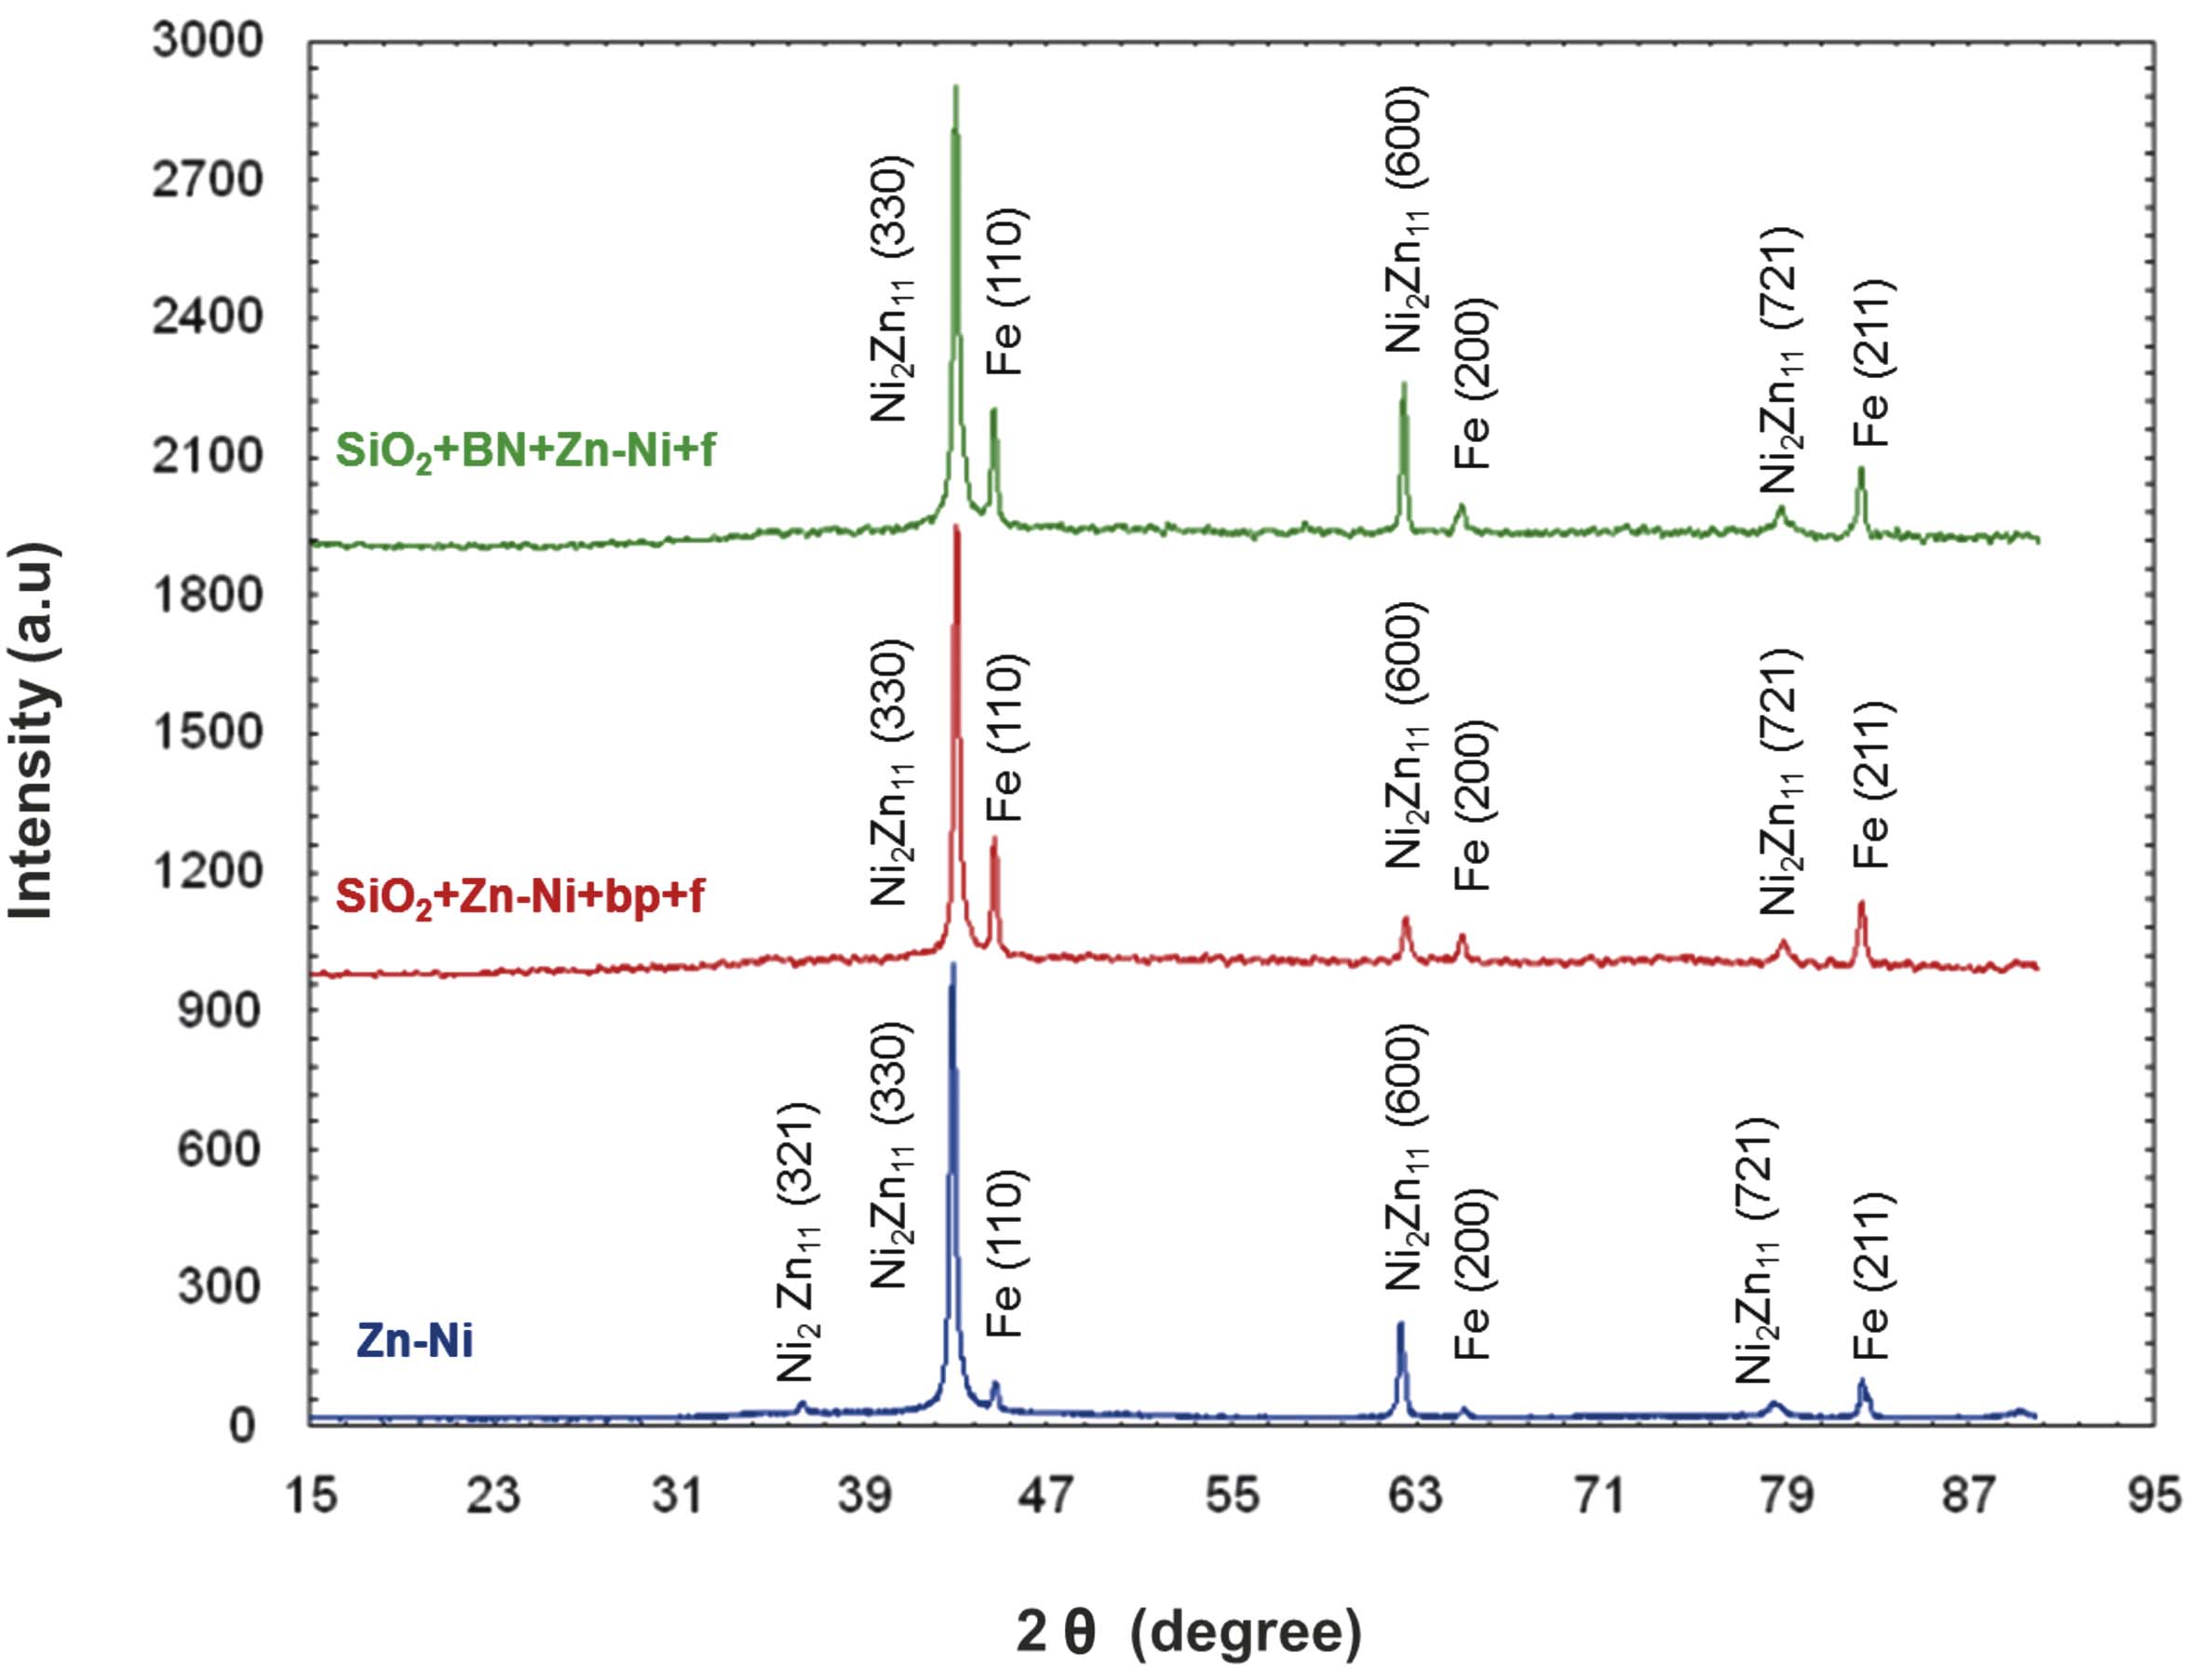 Fig. 4: Diffraction spectra of sample coatings